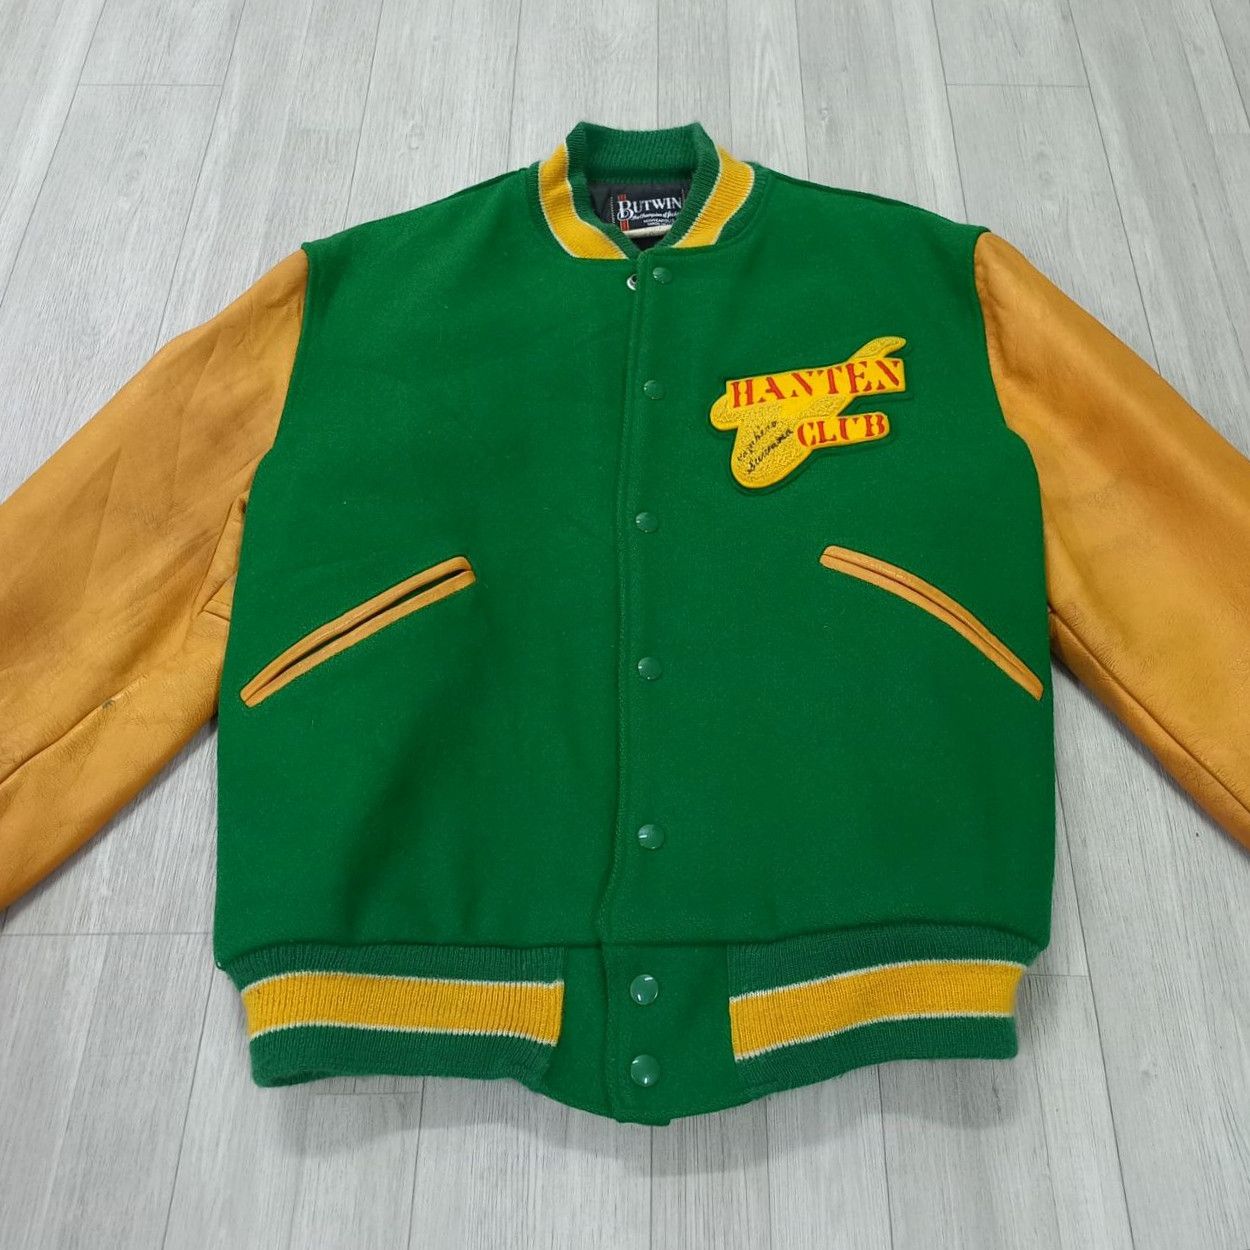 Union Made - HANTEN CLUB 1984 by BUTWIN USA Wool Leather Varsity Jacket - 7